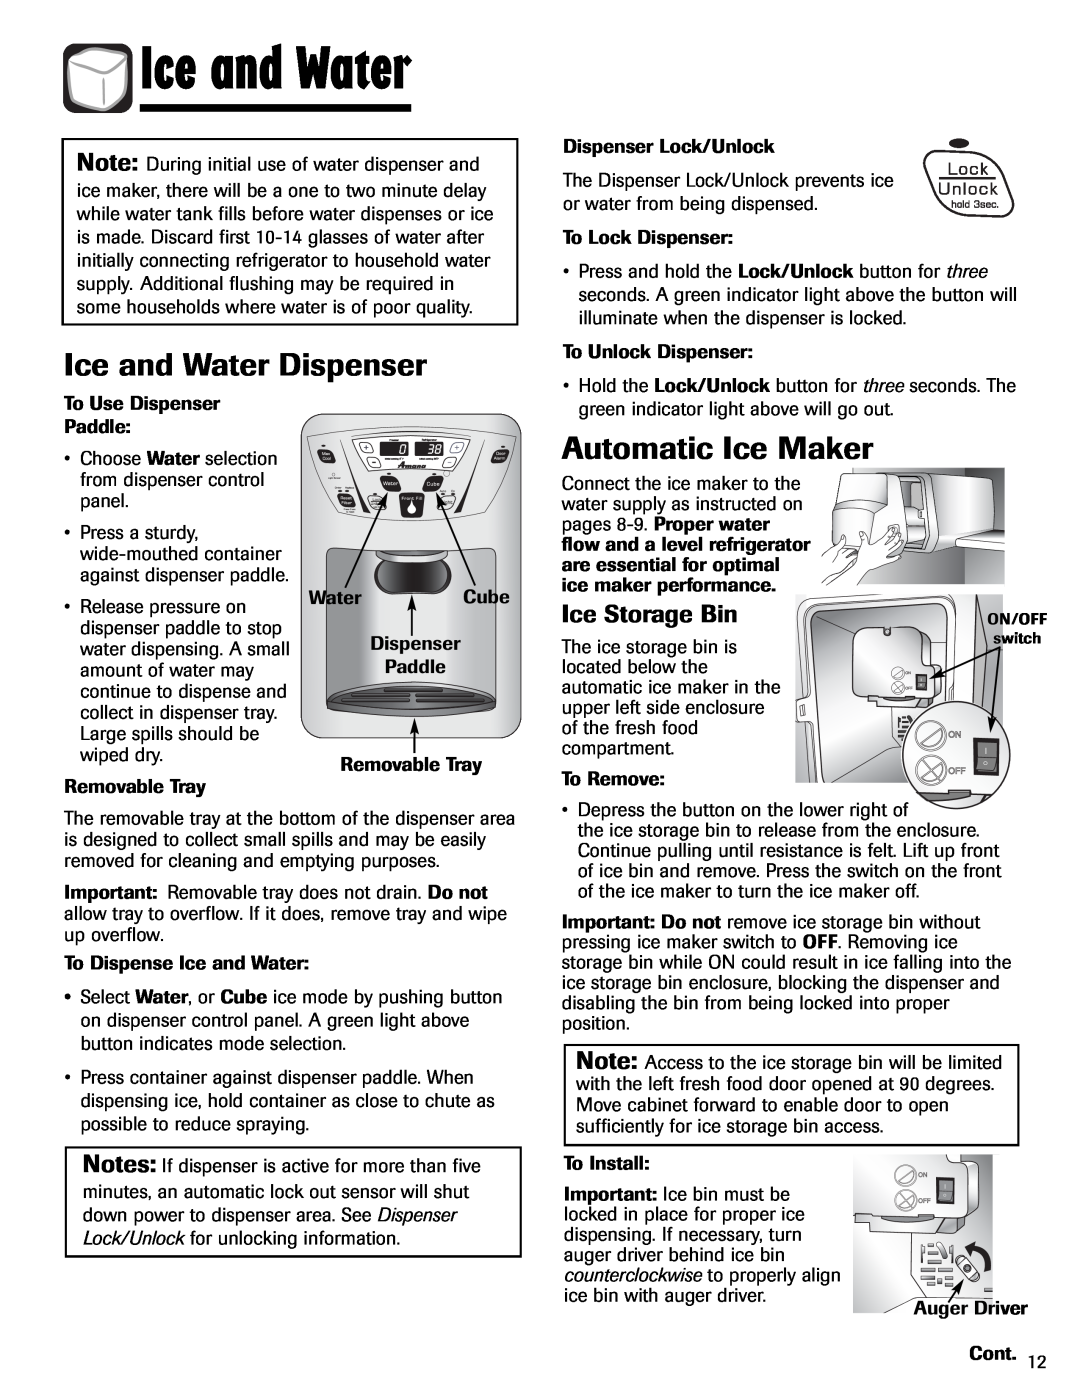 Amana AFI2538AEW important safety instructions Ice and Water Dispenser, Automatic Ice Maker, Ice Storage BinON/OFF 